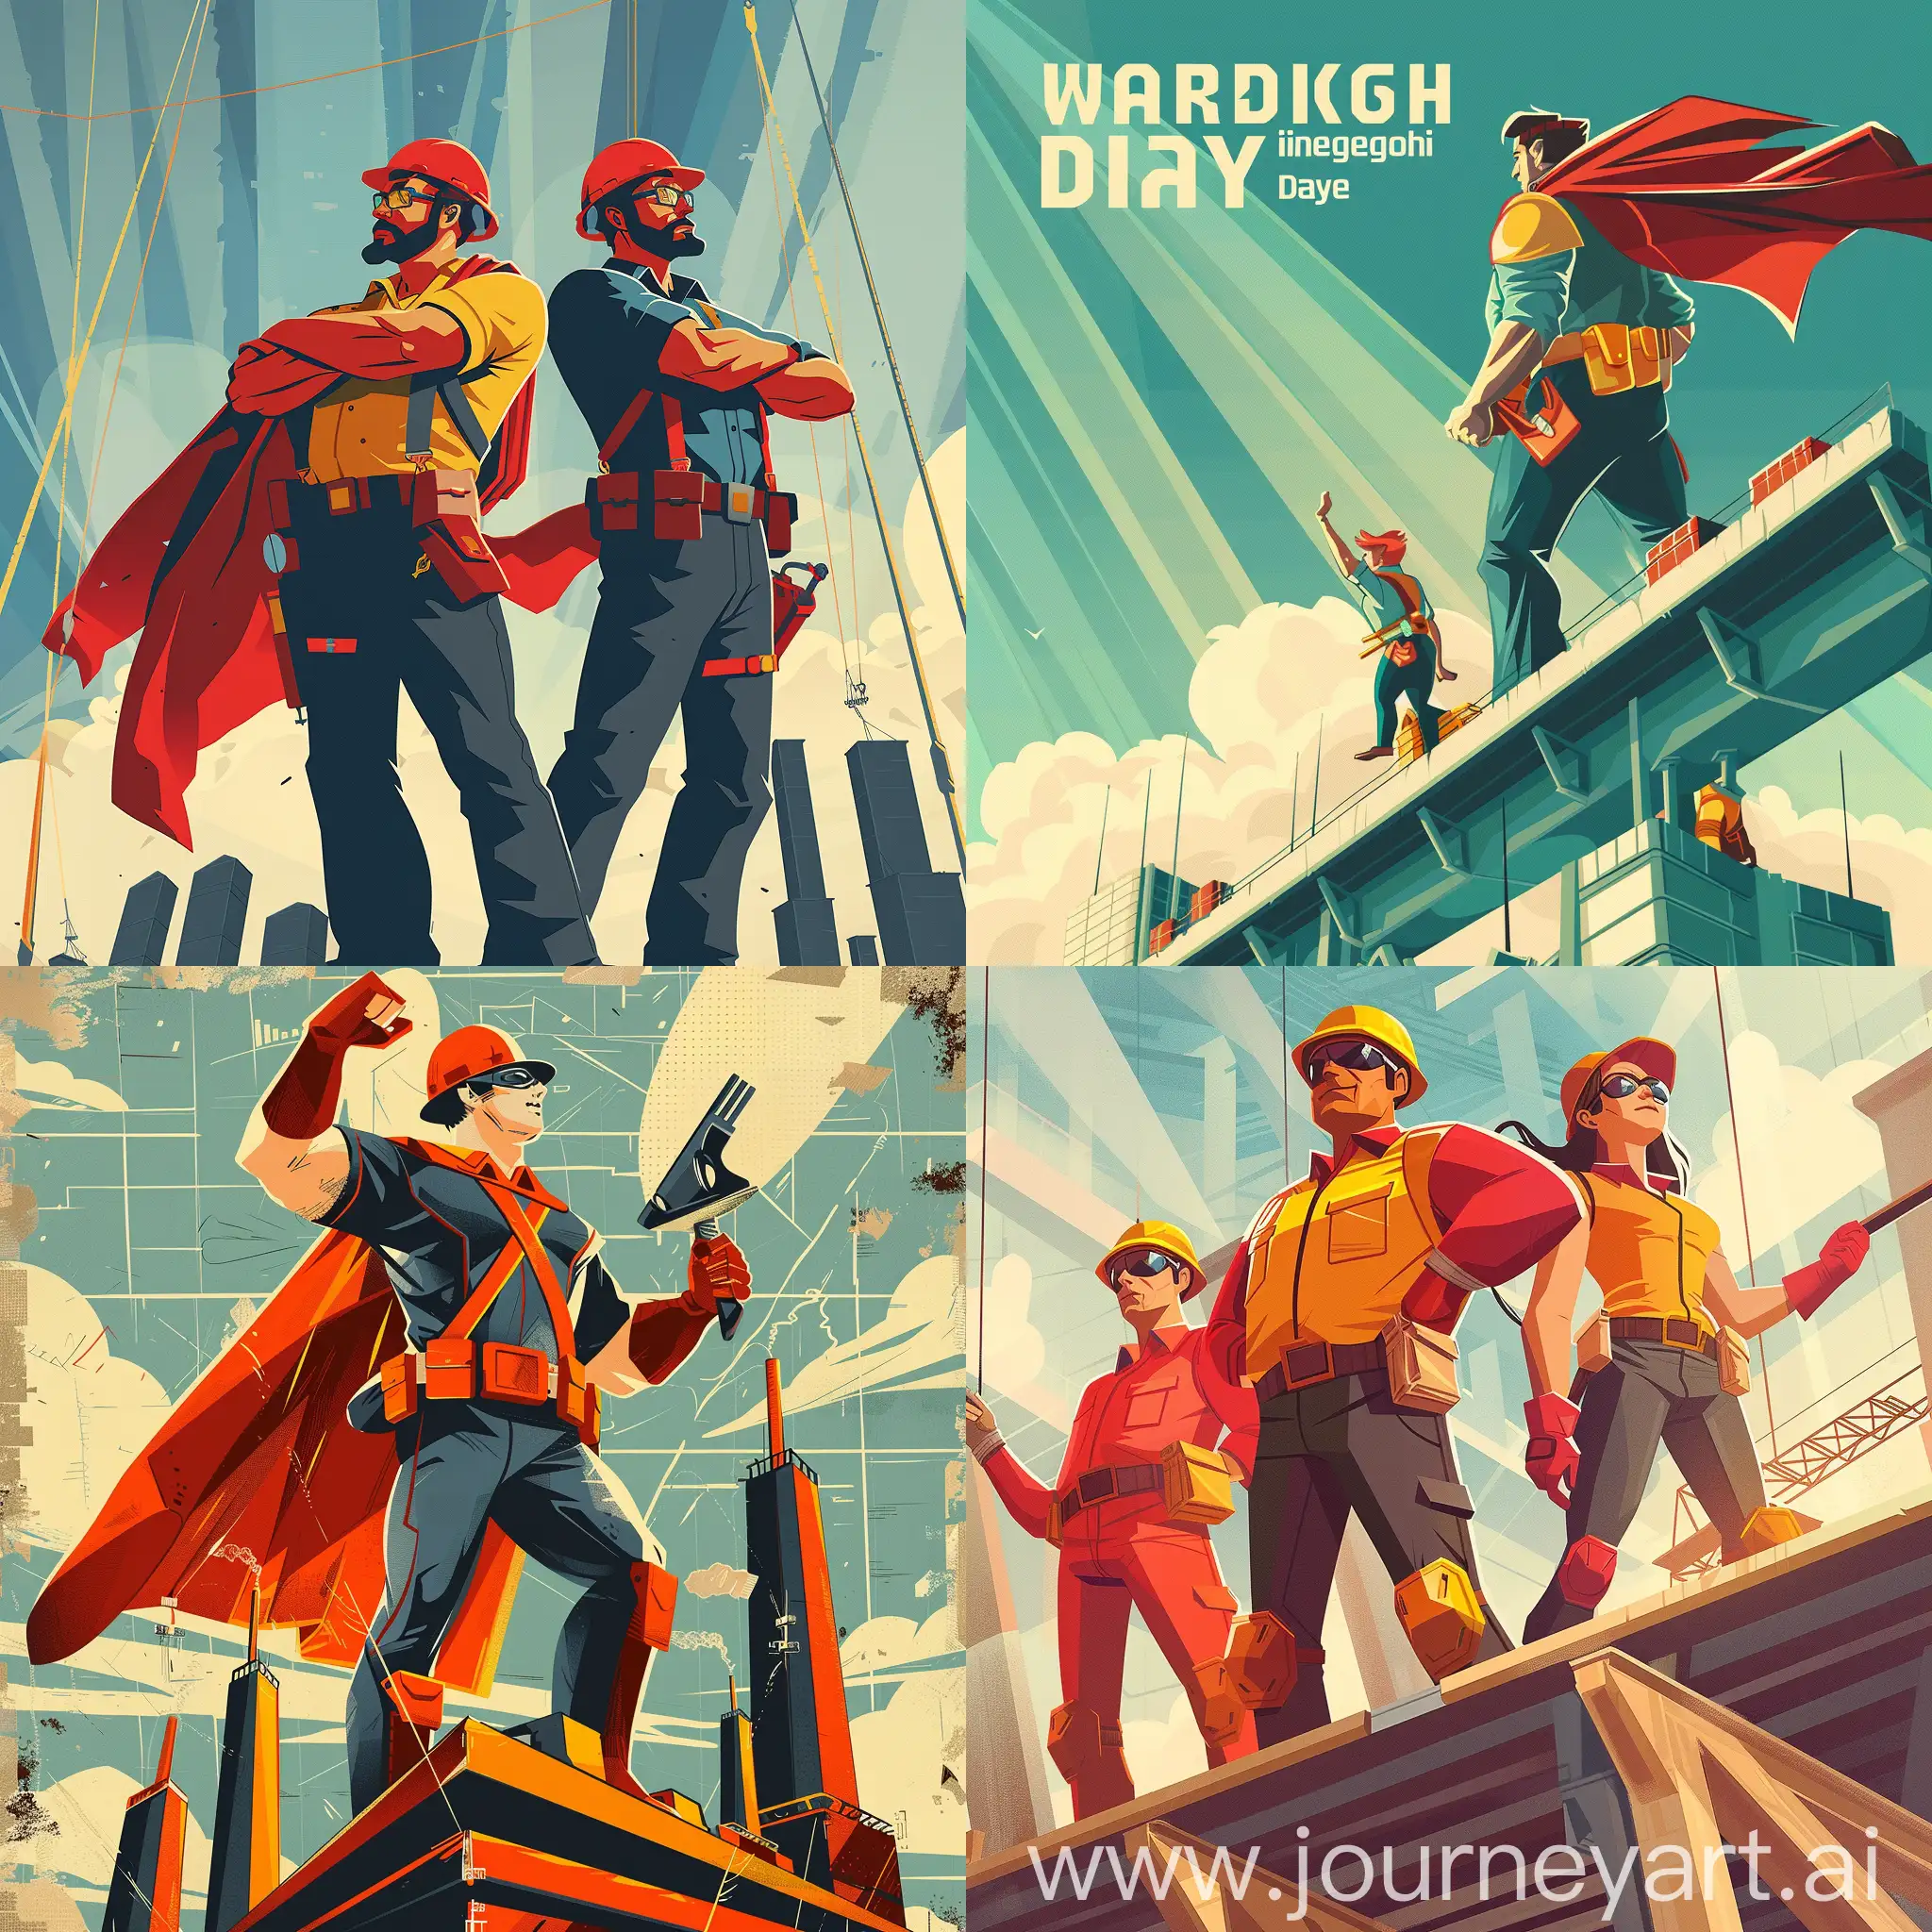 World engineering day poster for civil engineering consultants depict civil engineers as heroes. Should be ironic and for knight piesold company for our employees.